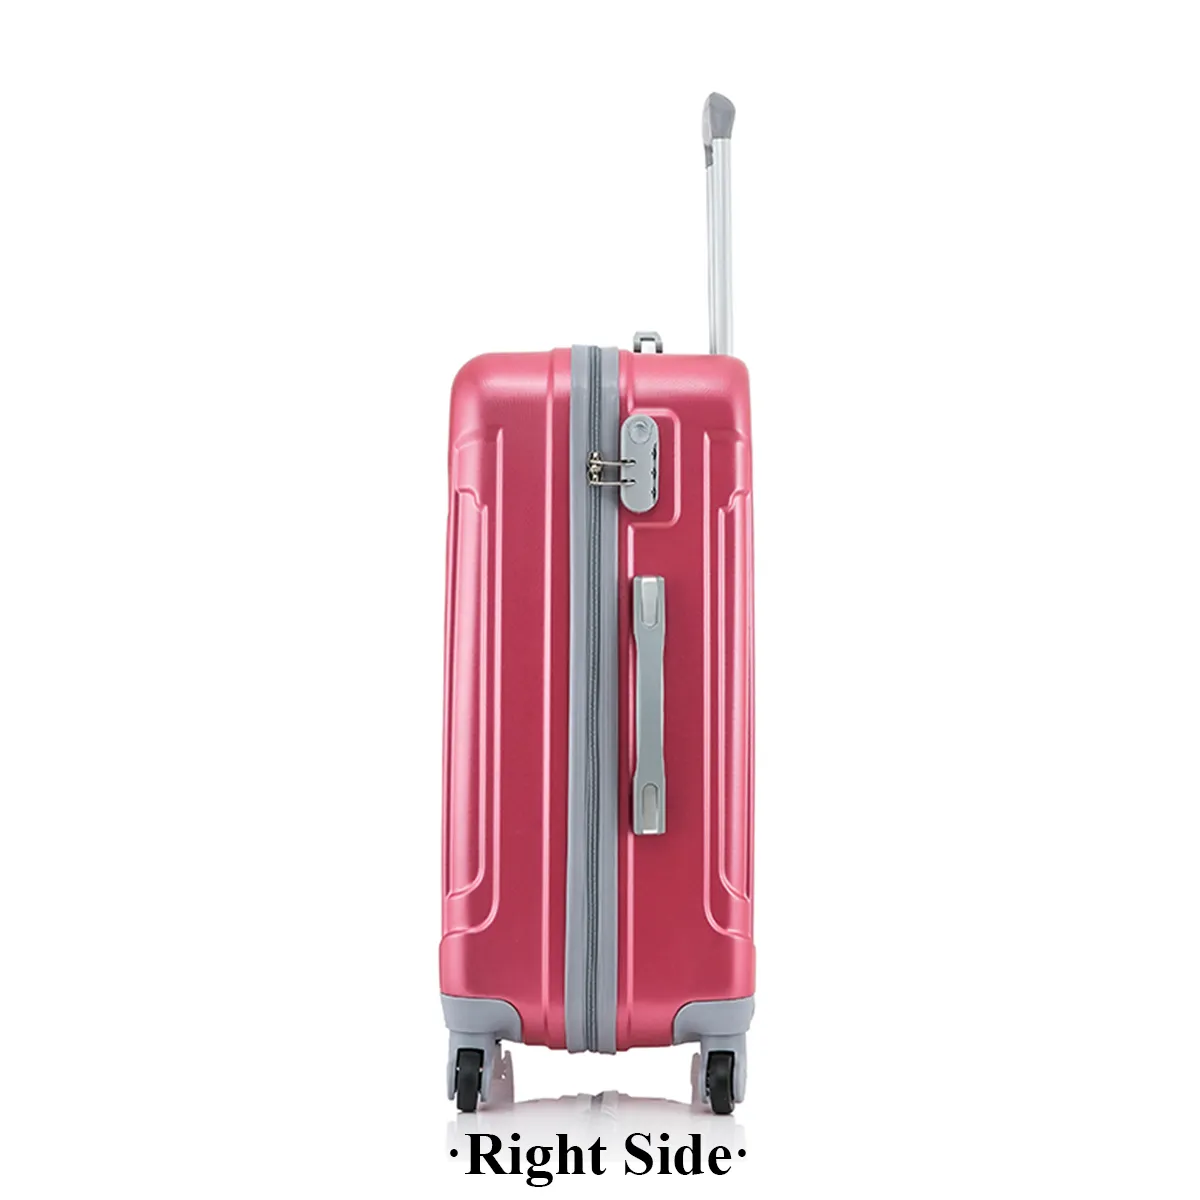 FASHION ABS HARD SHELL SUITCASE SPINNER TRAVEL BAGS LUGGAGE SETS TROLLEY